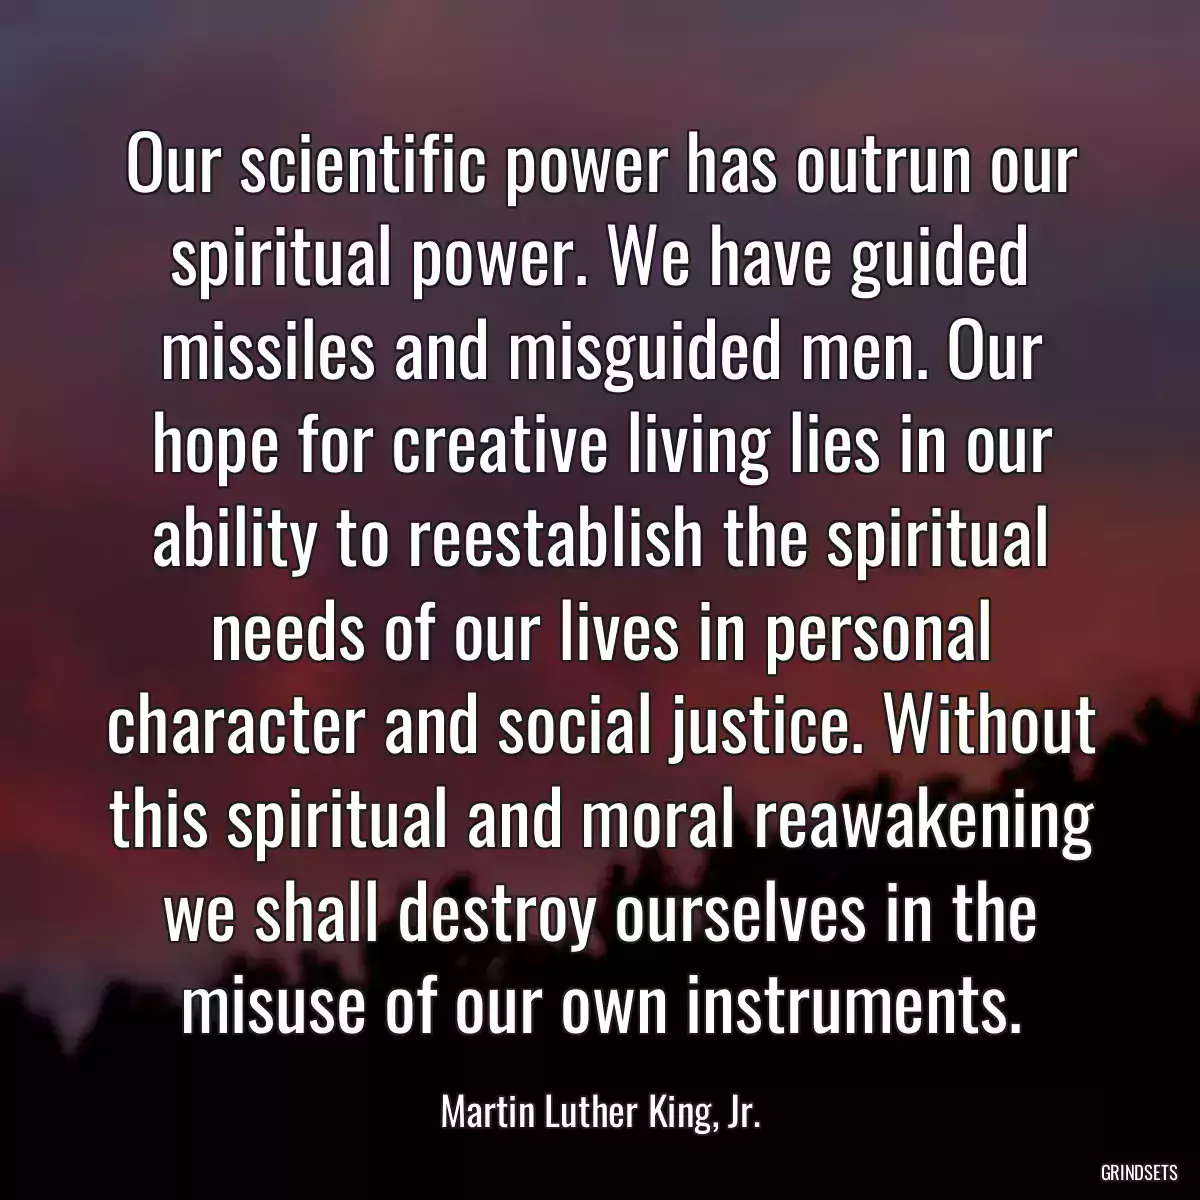 Our scientific power has outrun our spiritual power. We have guided missiles and misguided men. Our hope for creative living lies in our ability to reestablish the spiritual needs of our lives in personal character and social justice. Without this spiritual and moral reawakening we shall destroy ourselves in the misuse of our own instruments.